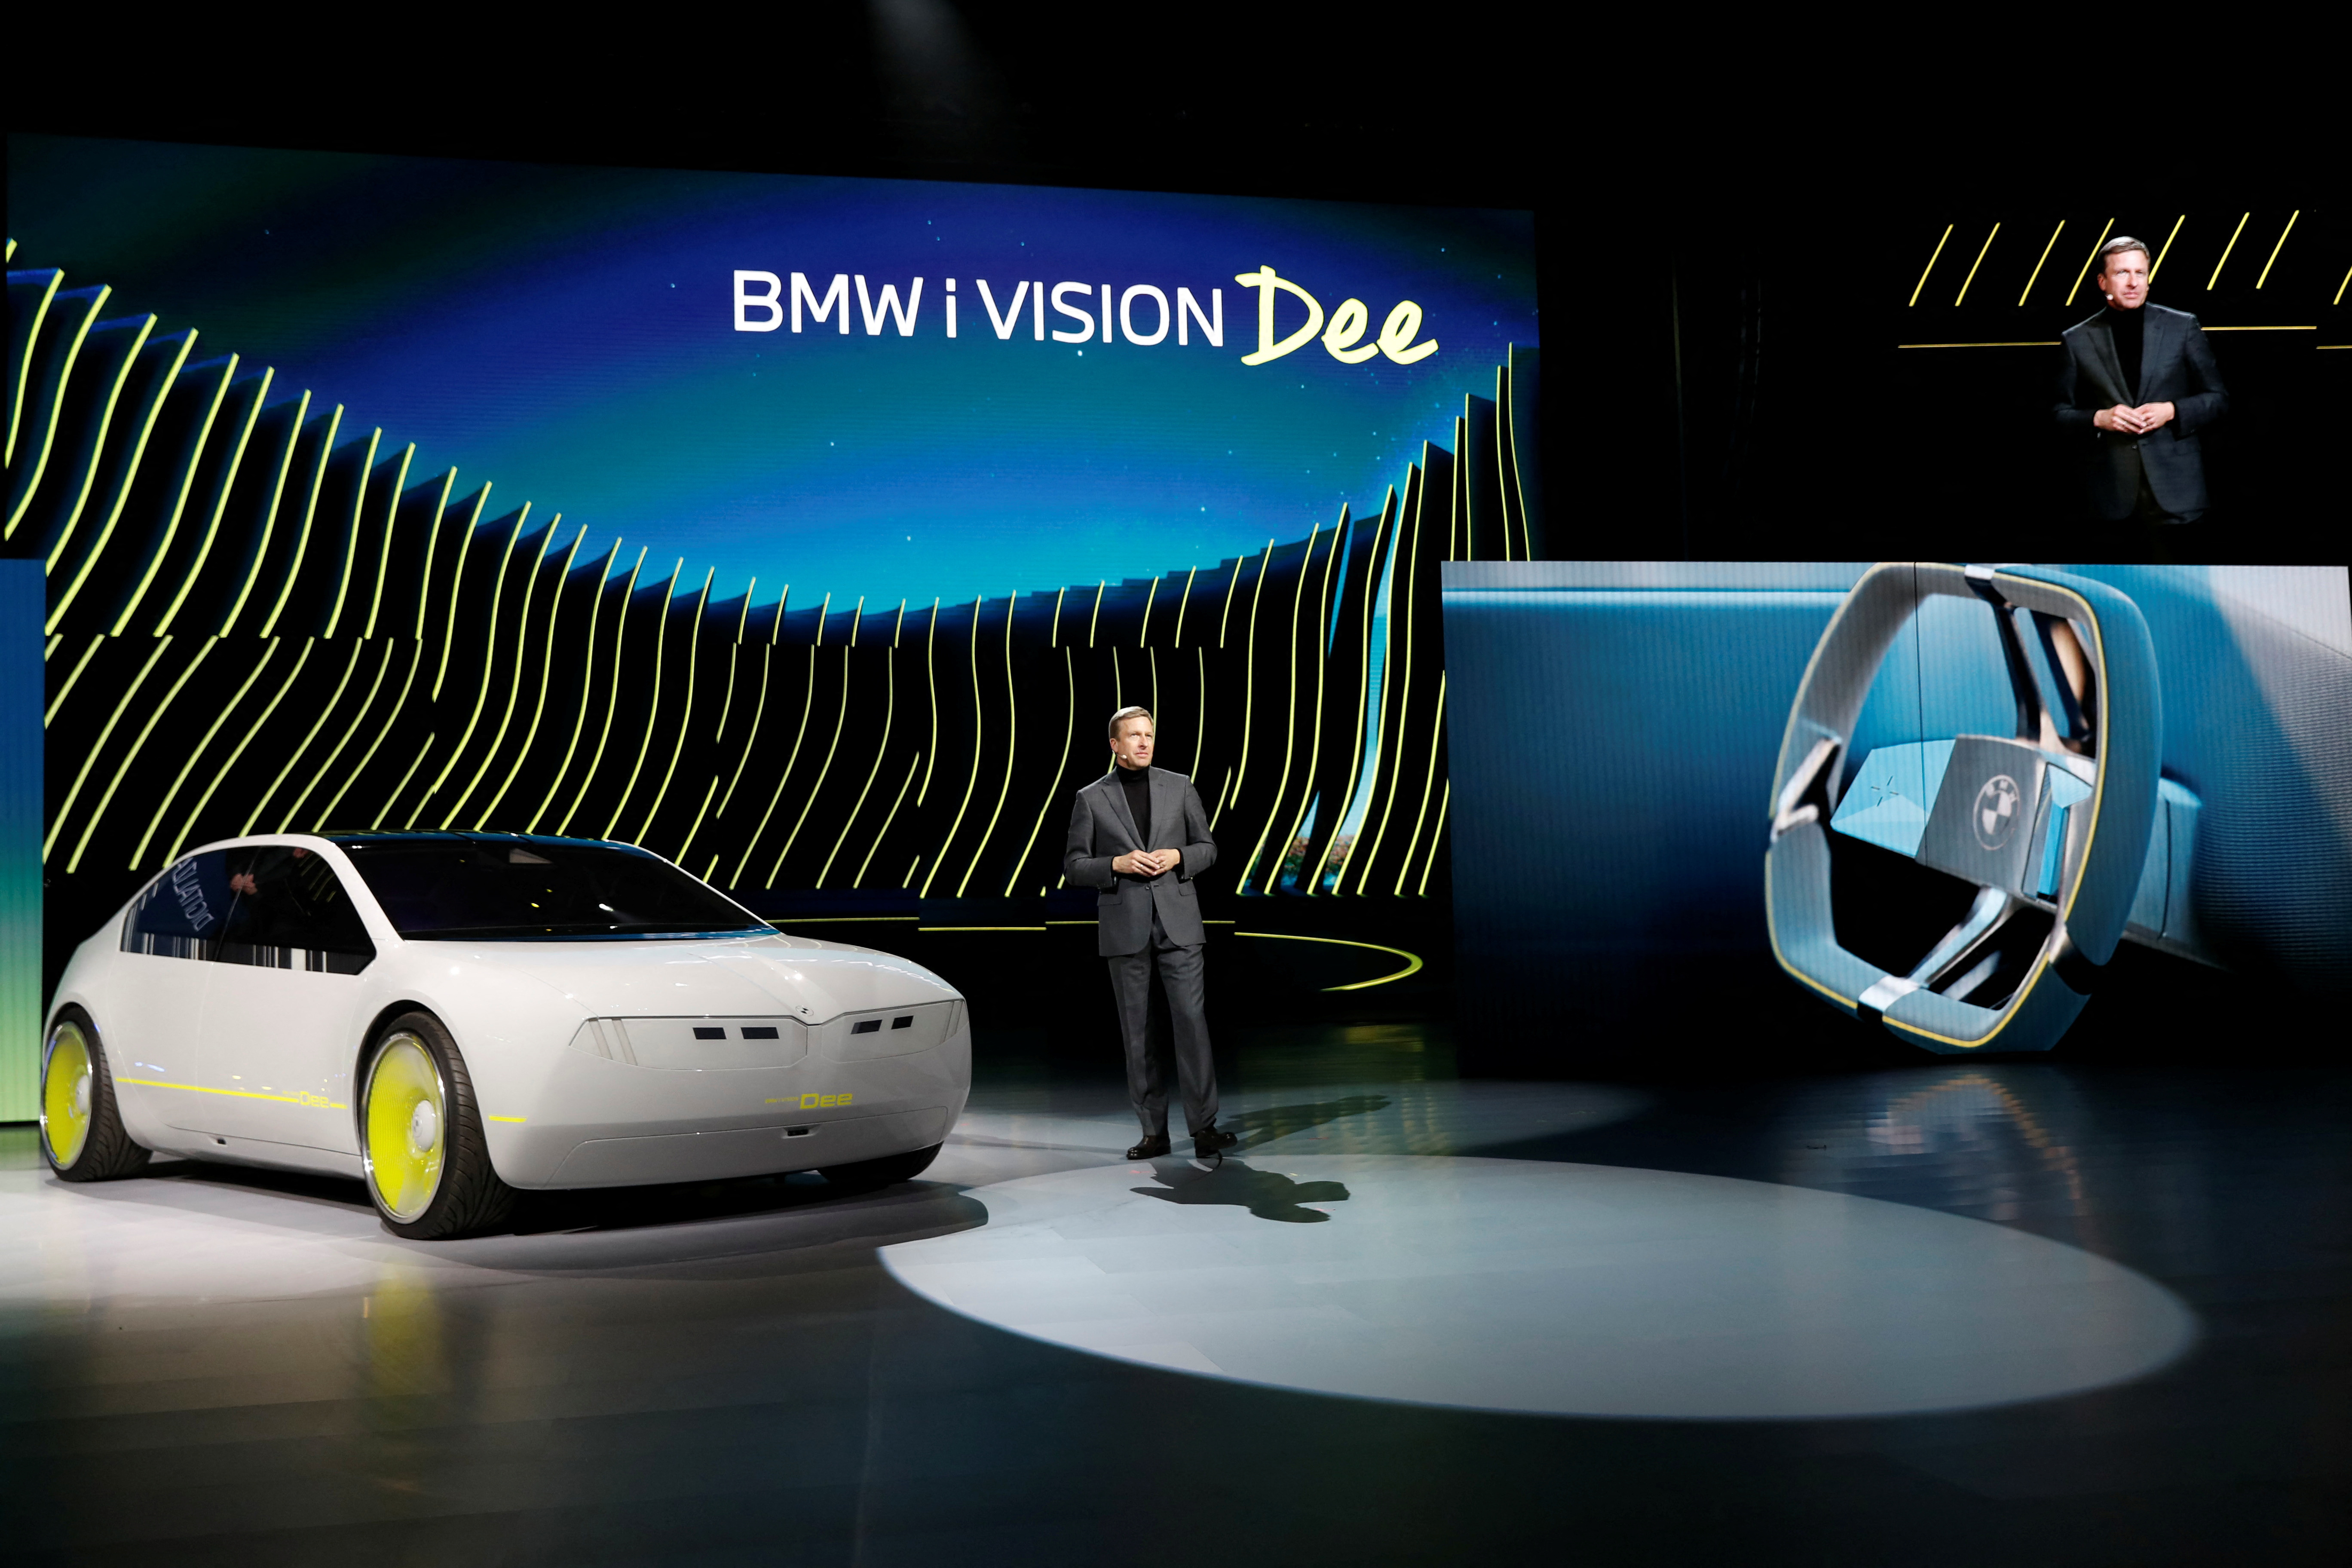 Watch: BMW i Vision Dee - A Car That Can Change Colour In Seconds